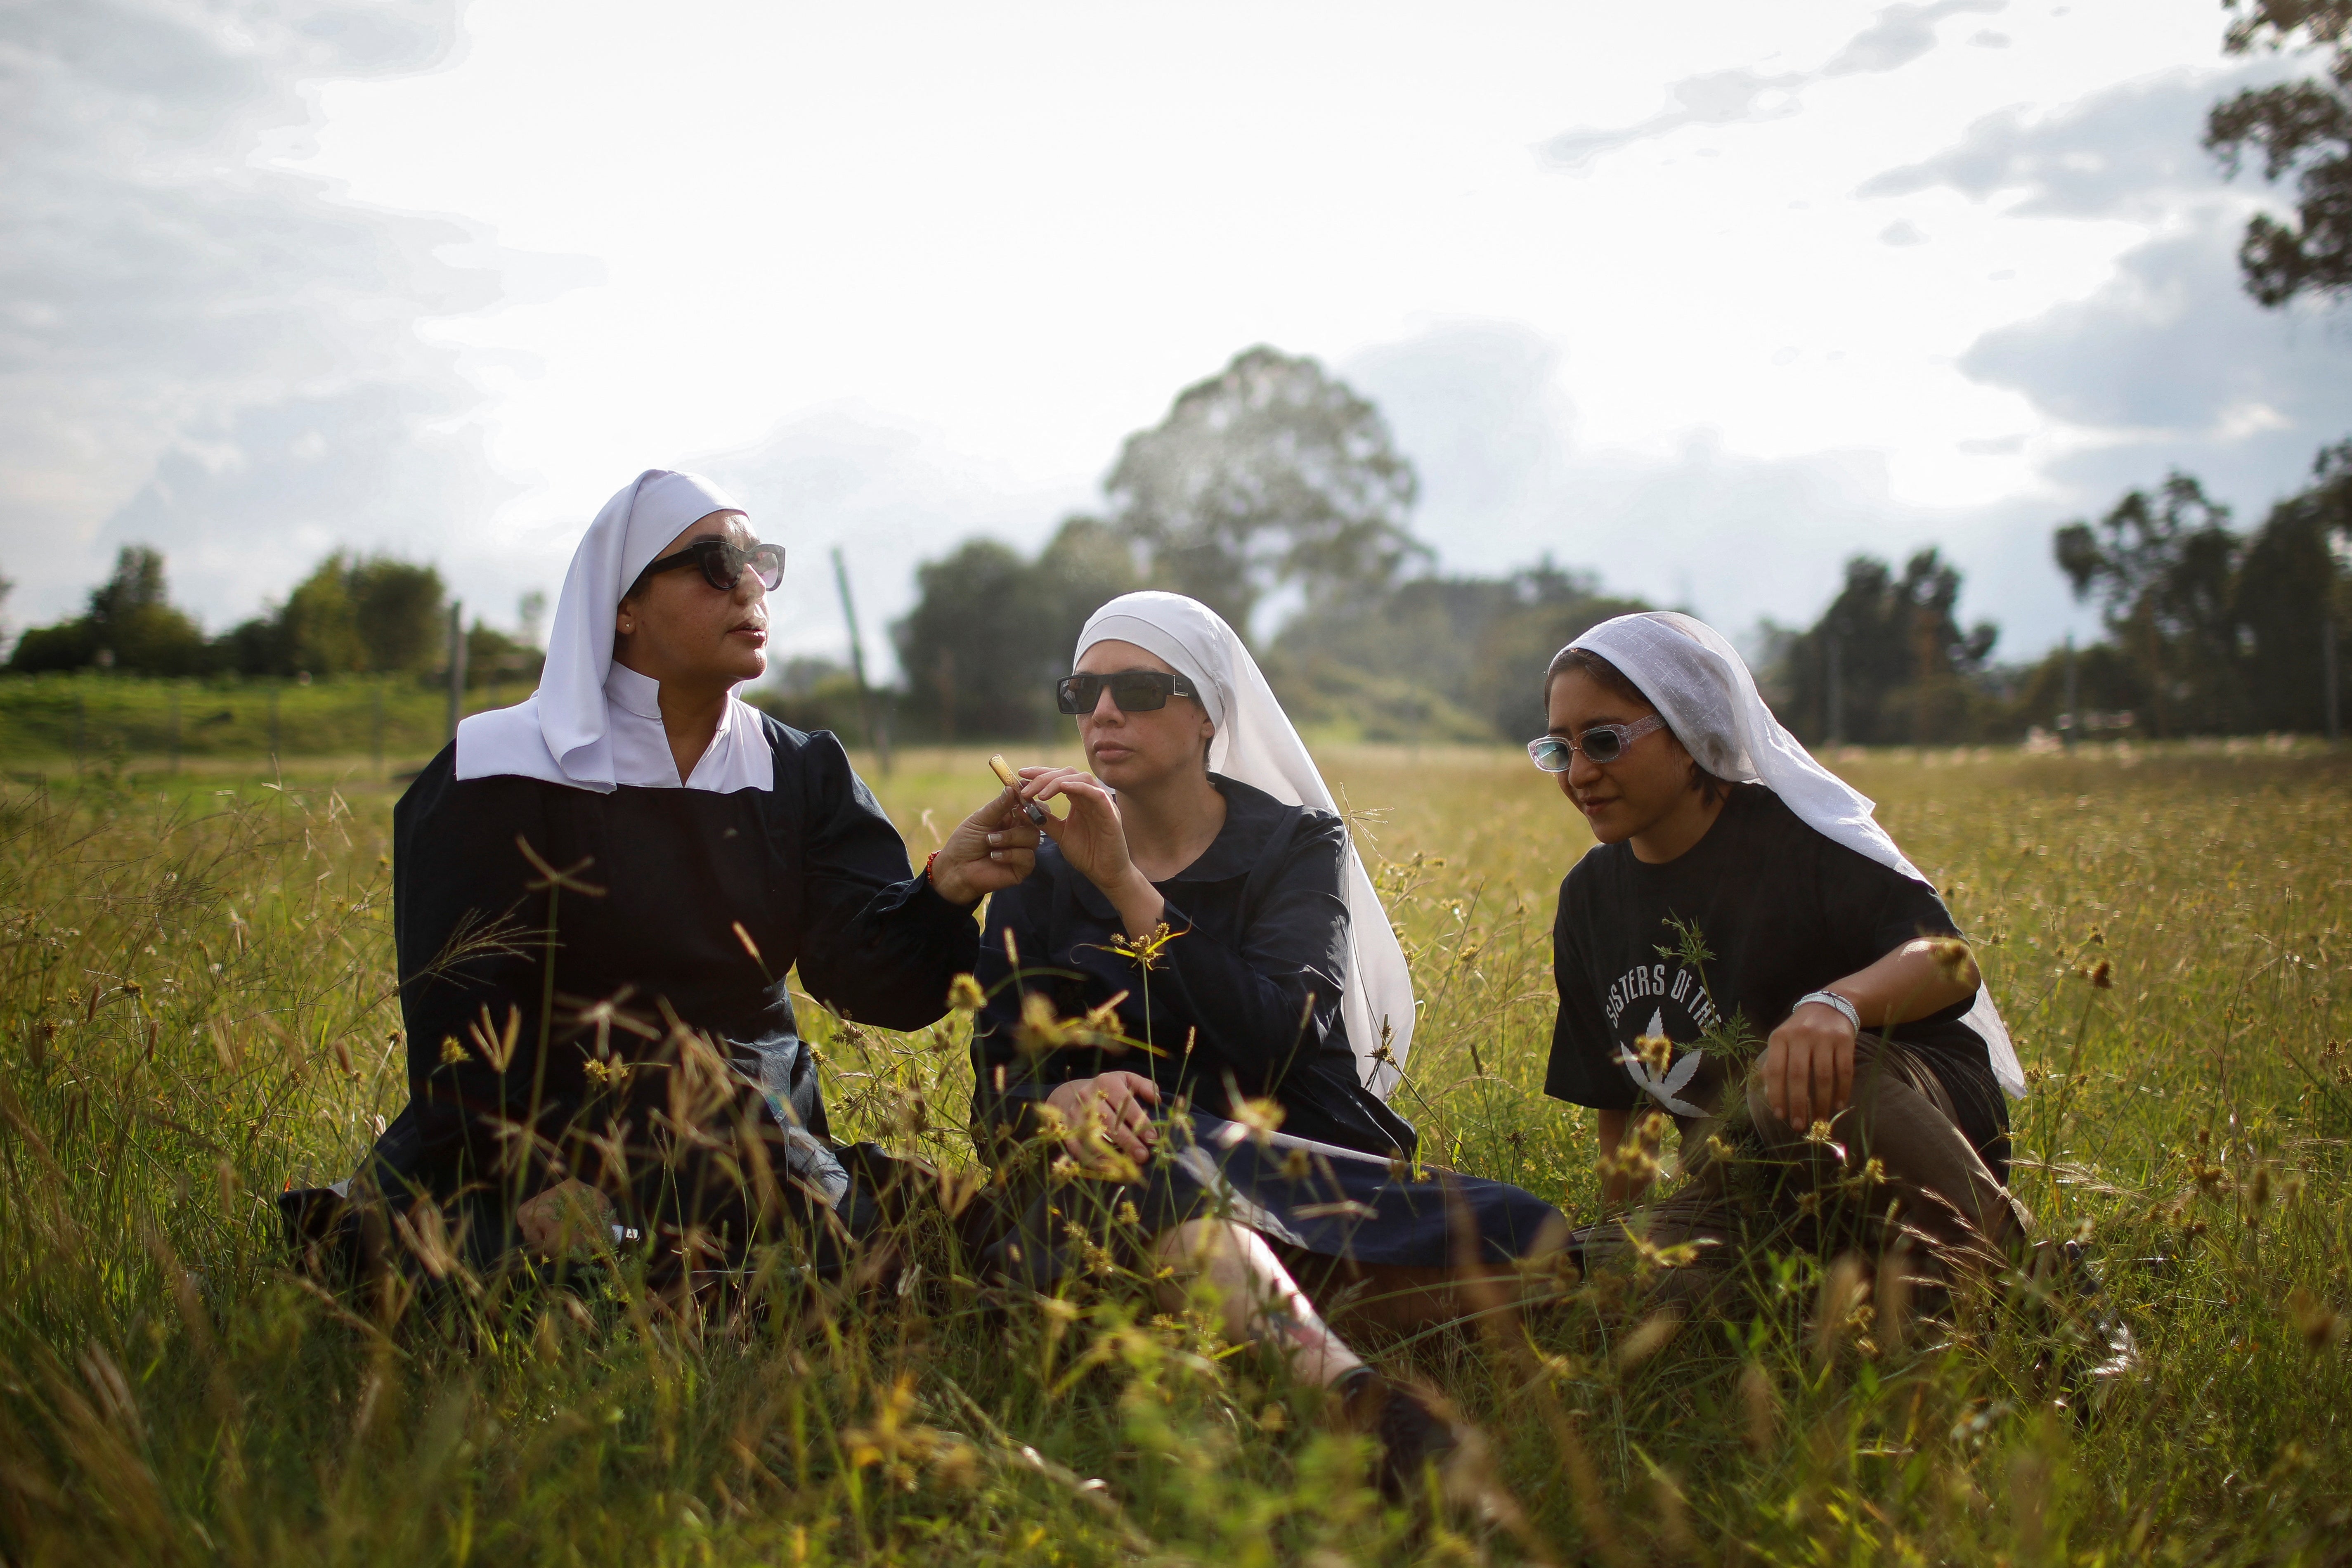 Sister Kika, Sister Bernardet and Sister Yeri, to use their online pseudonyms, smoke a joint at the Sister’s of the Valley farm